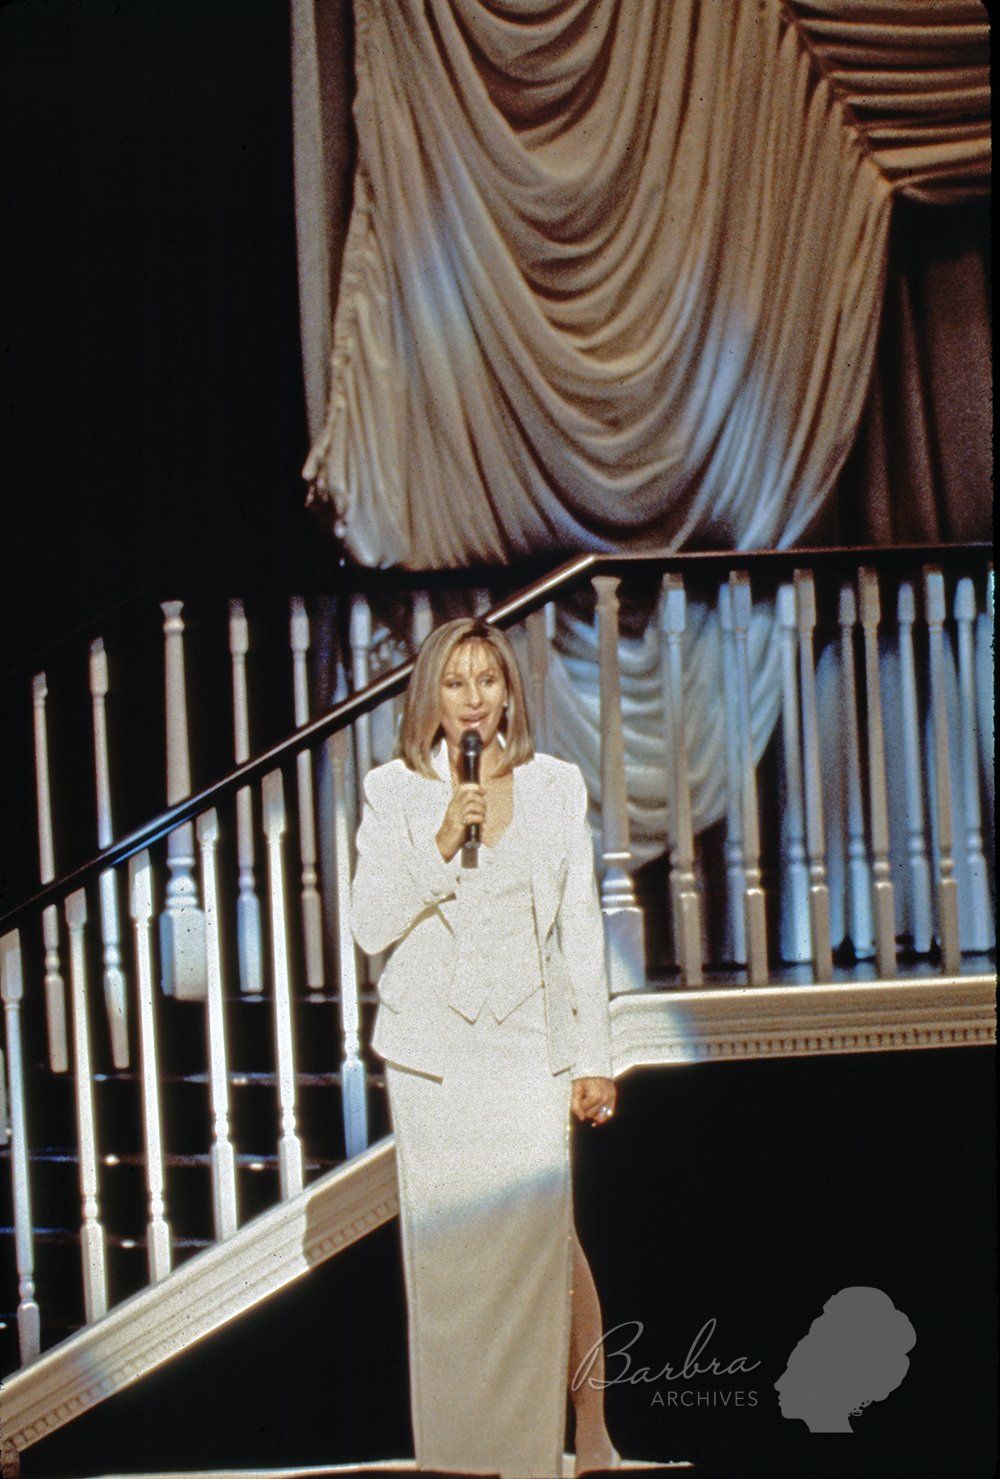 Barbra Streisand wearing off-white suit and skirt in the second act of her concert.